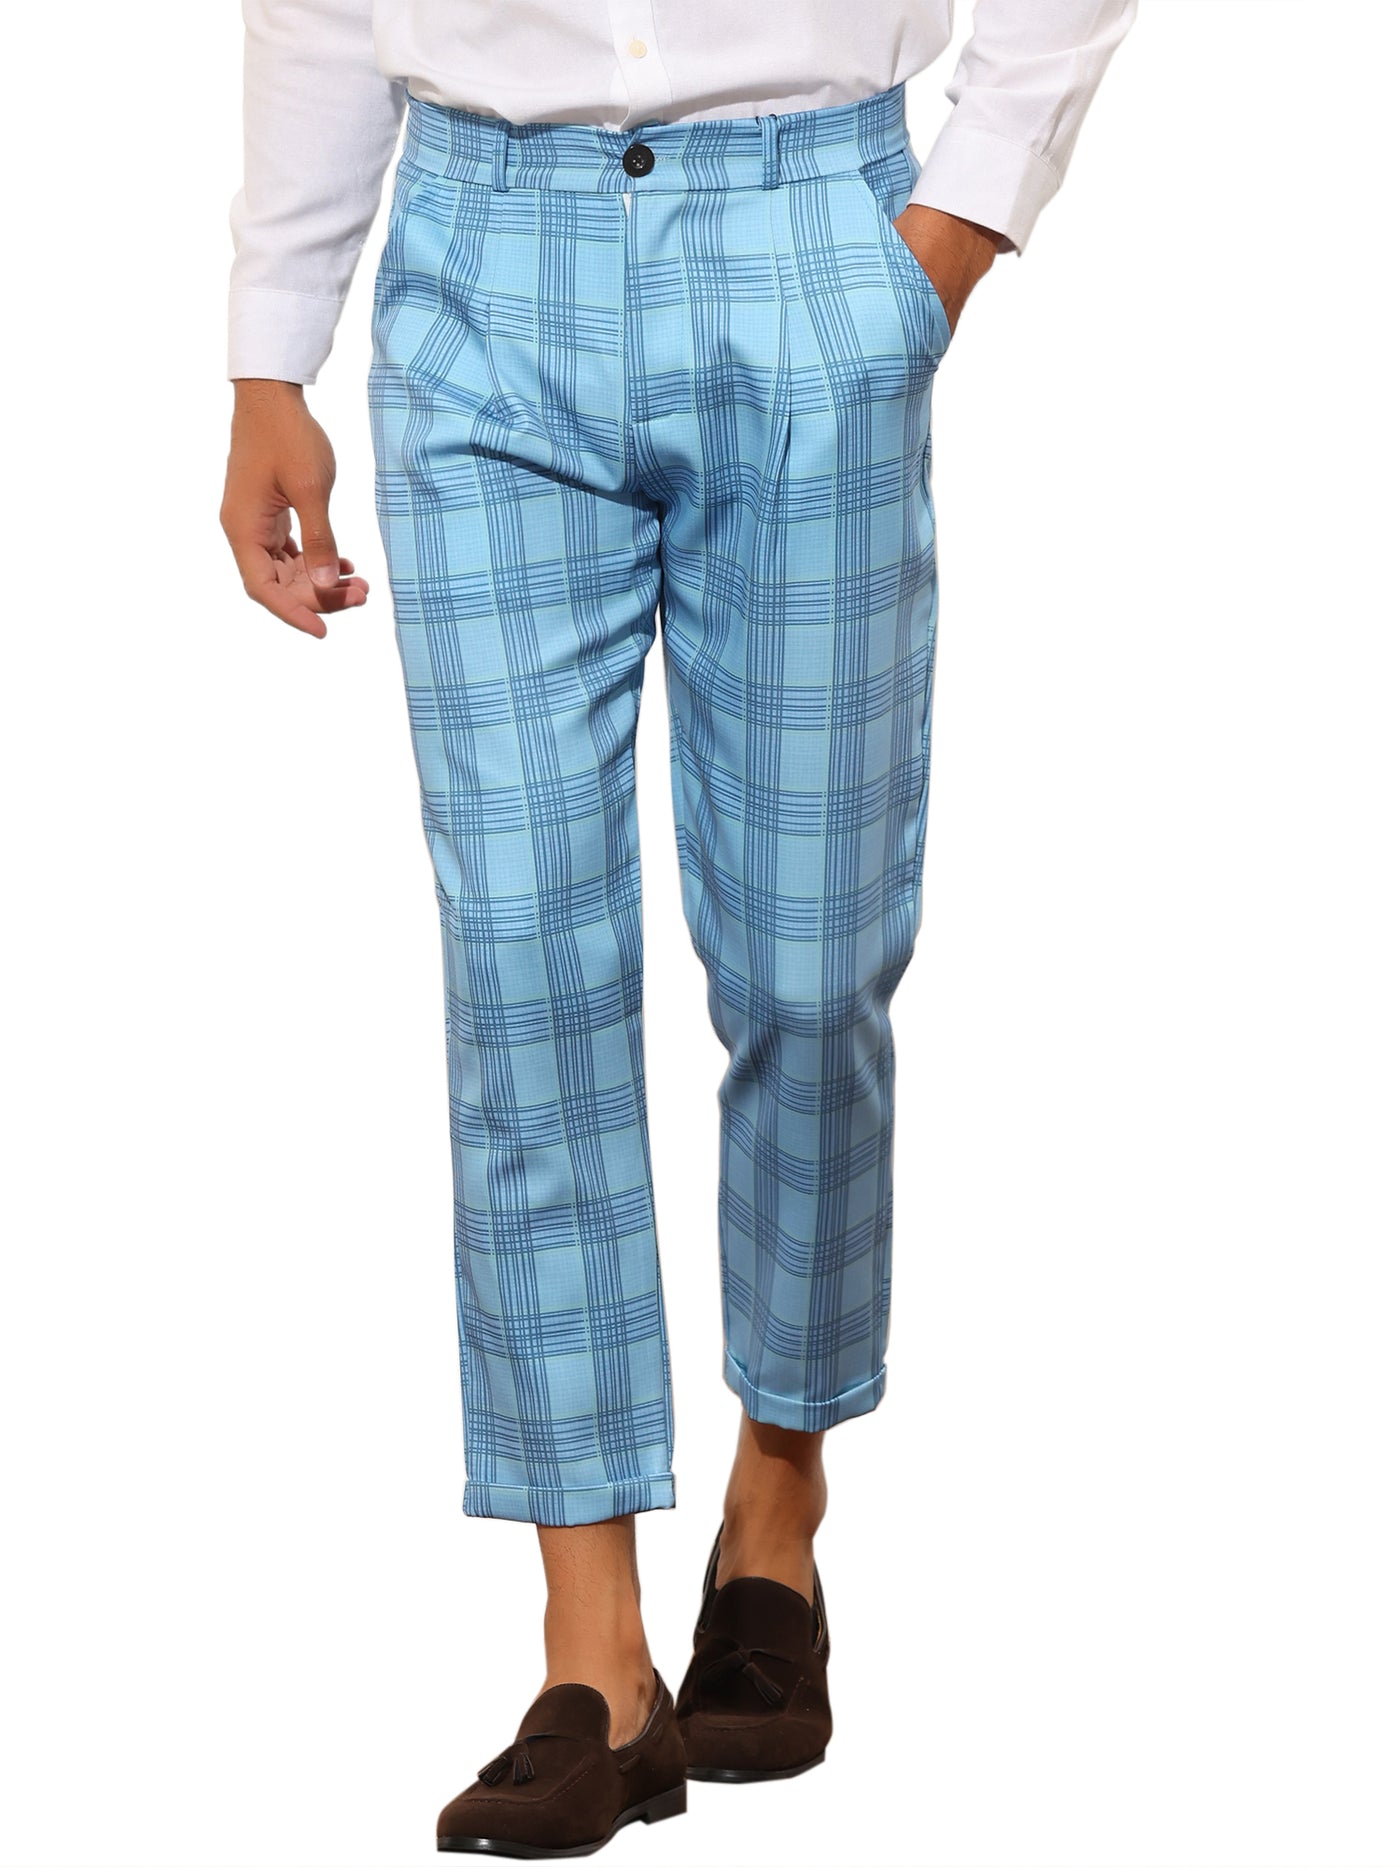 Bublédon Men's Plaid Slim Fit Ankle Length Tapered Checked Cropped Dress Pant